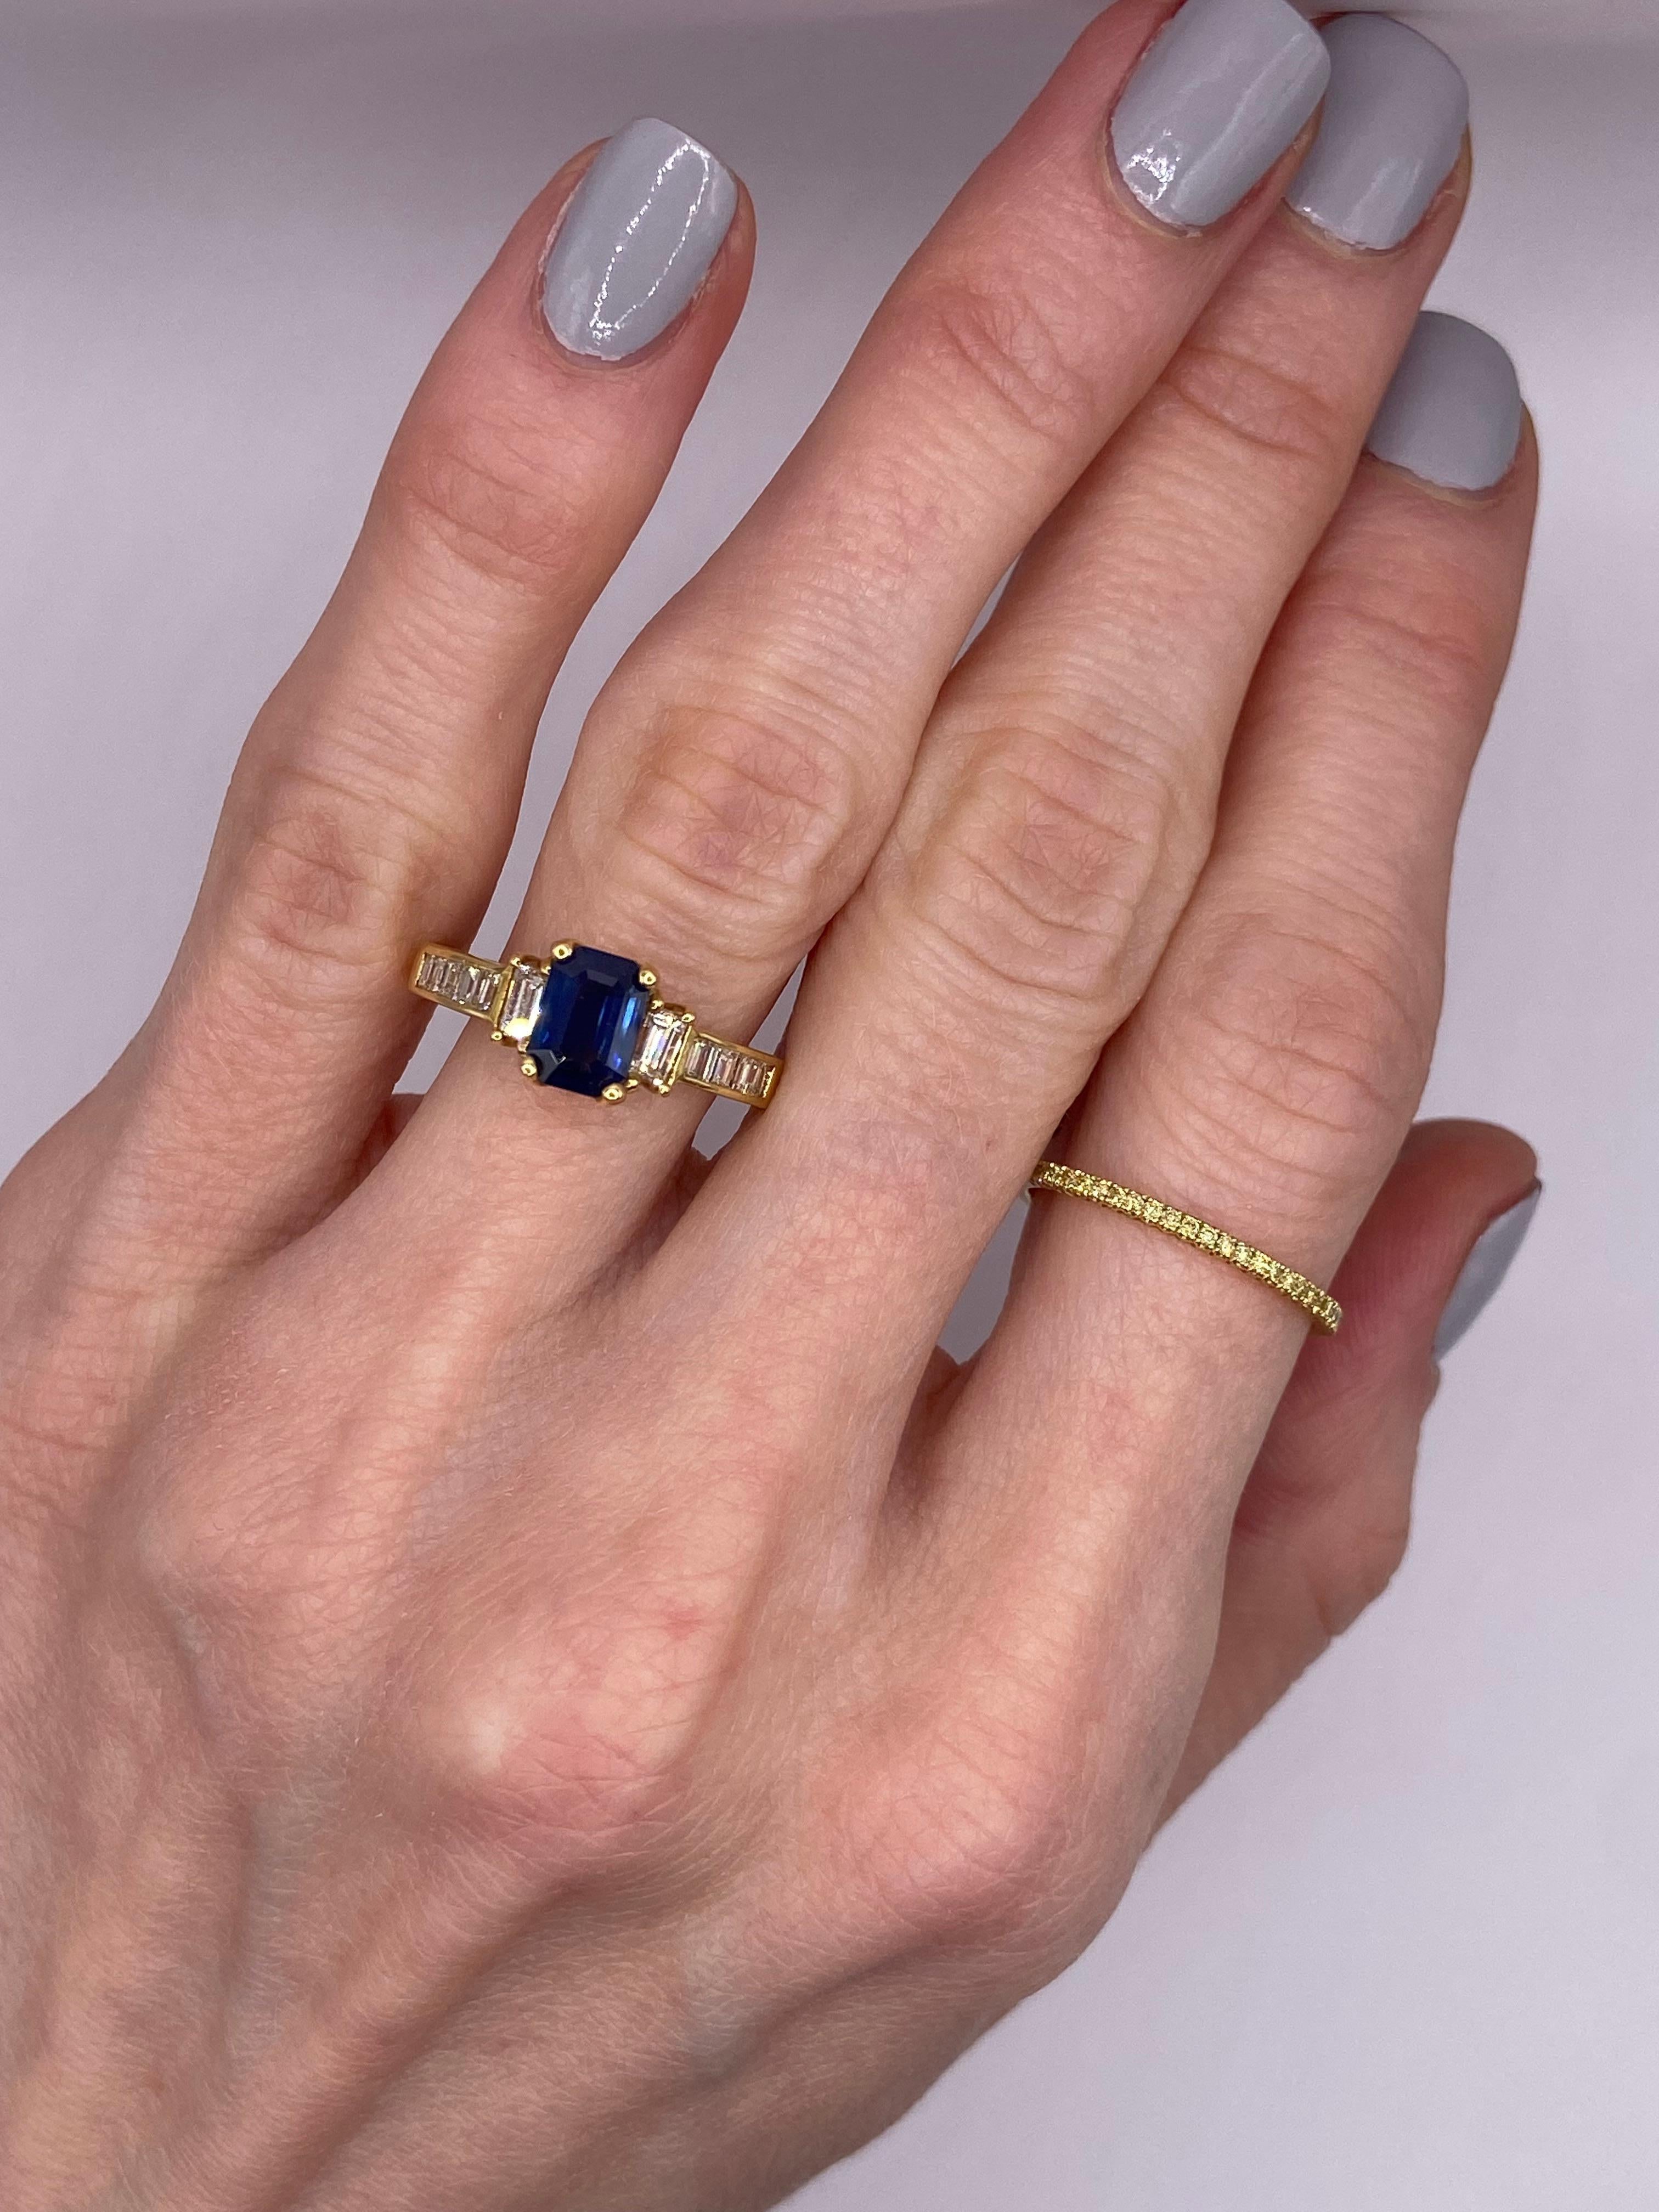 Metal: 18KT Yellow Gold
Finger Size: 6.75
(ring is size 6.75, but is sizable upon request)

Number of Emerald Cut Sapphires: 1
Carat Weight: 1.25ctw
Stone Size: 7 x 5mm

Number of Emerald Cut Diamonds: 2
Carat Weight: 0.40ctw

Number of Baguette